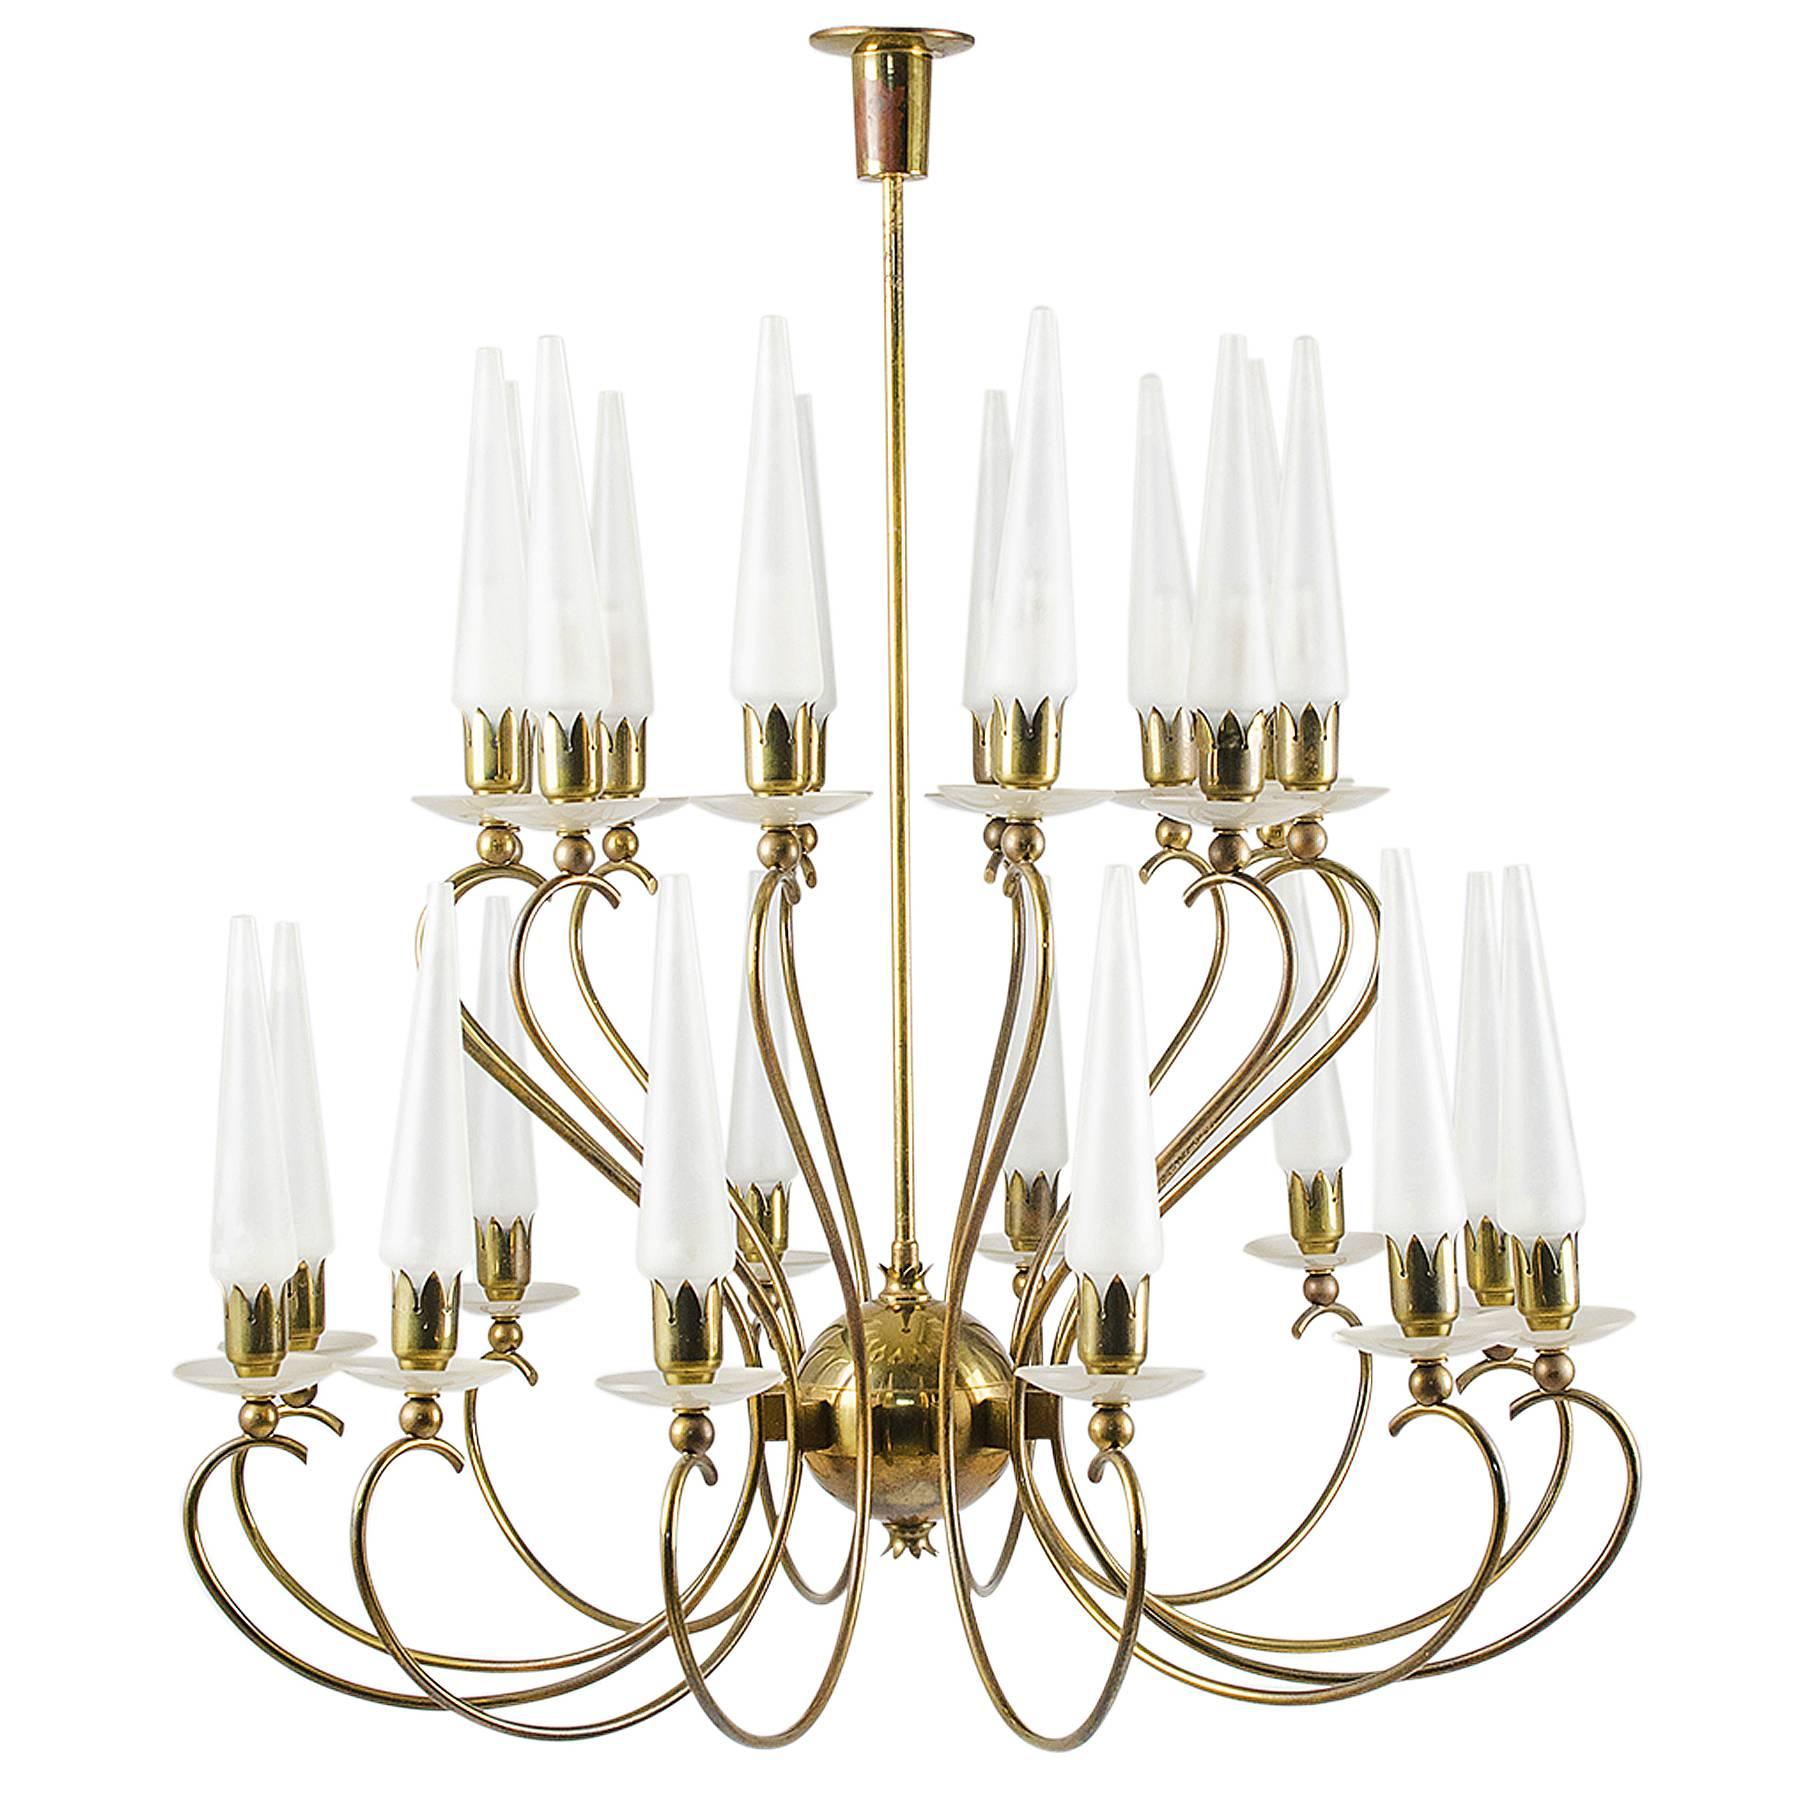 Large and Rare Angelo Lelli for Arredoluce Glass Candle Chandelier, 1950